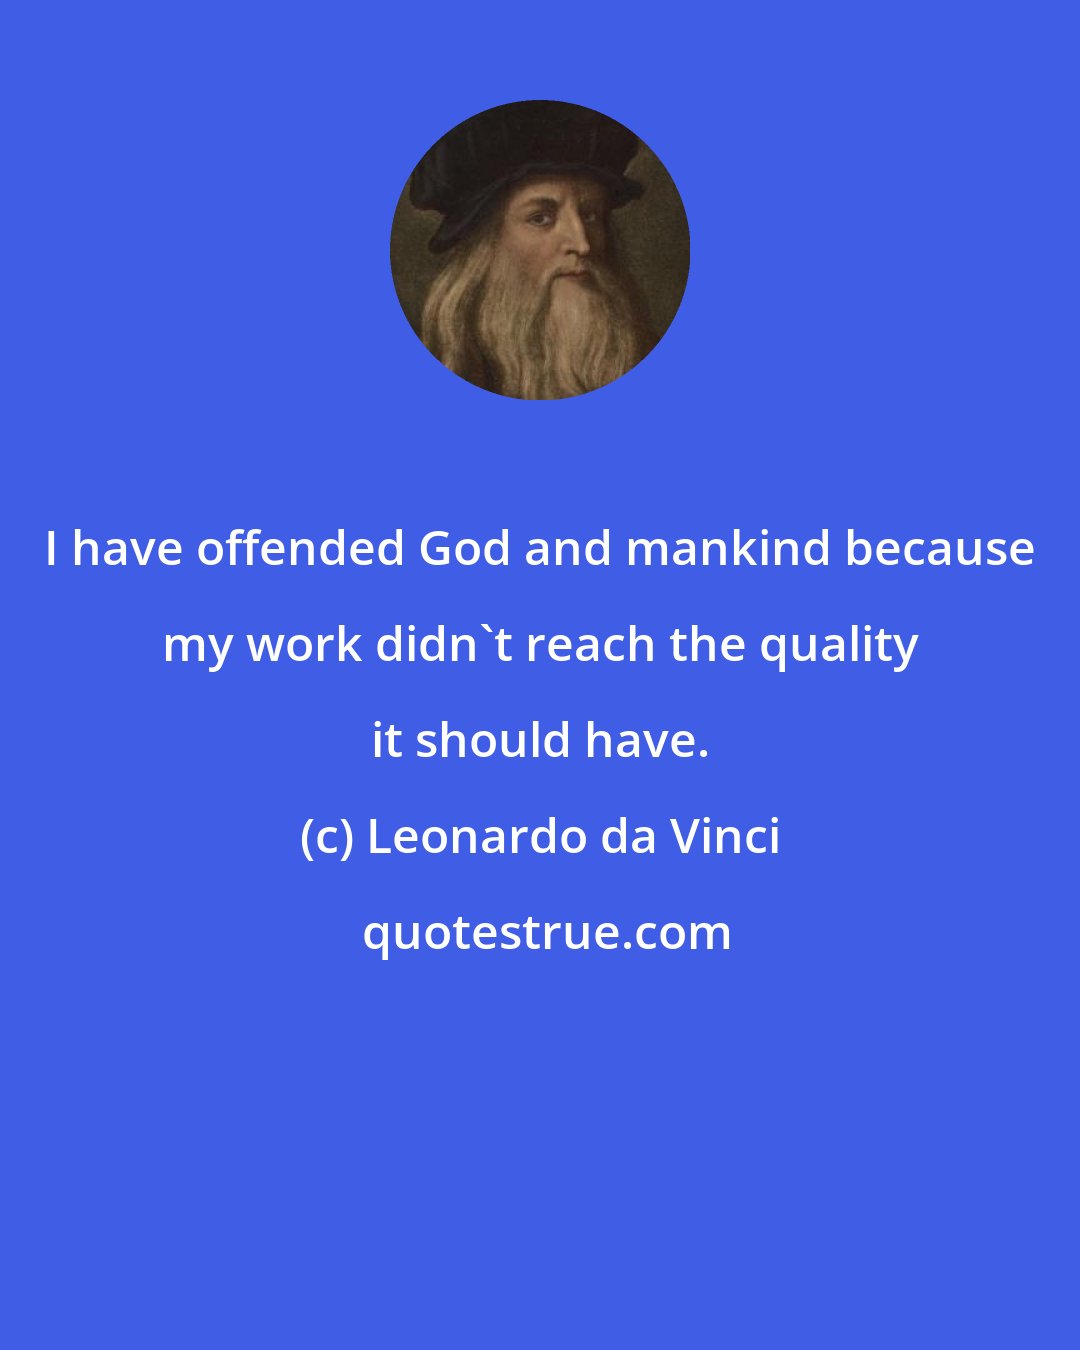 Leonardo da Vinci: I have offended God and mankind because my work didn't reach the quality it should have.